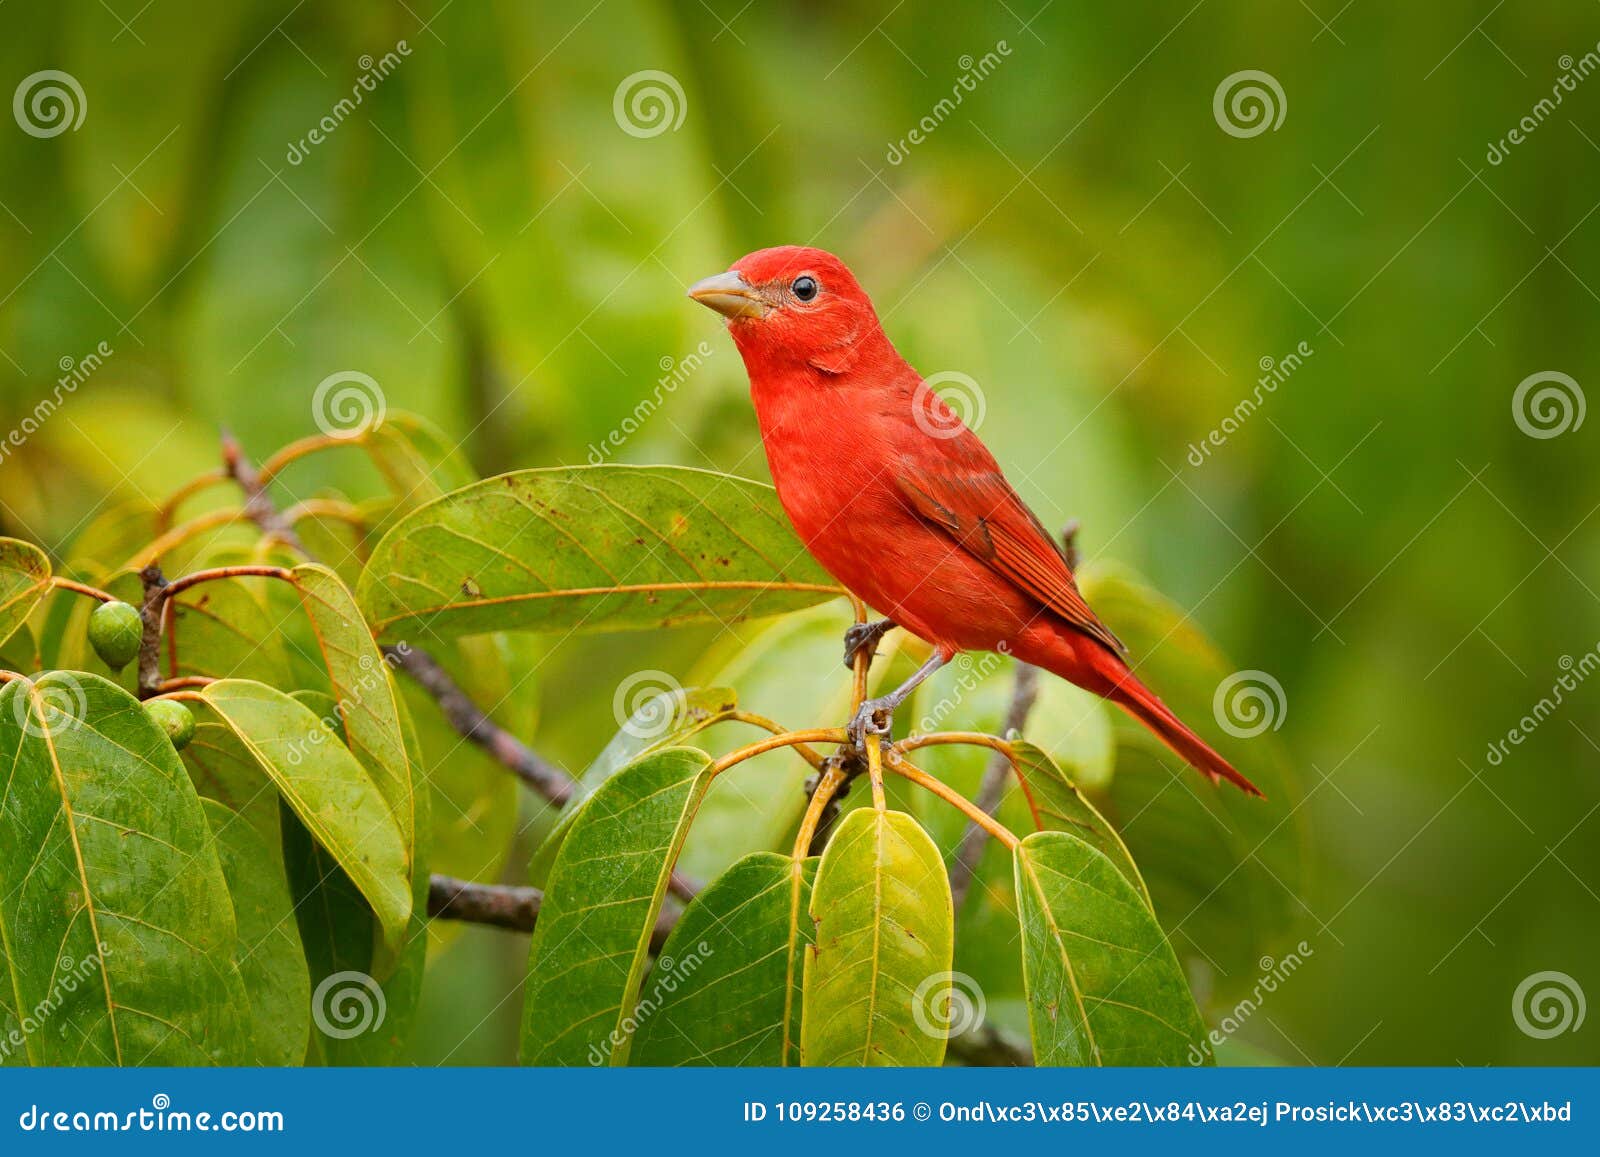 summer tanager, piranga rubra, red bird in the nature habitat. tanager sitting on the green palm tree. birdwatching in costa rica.